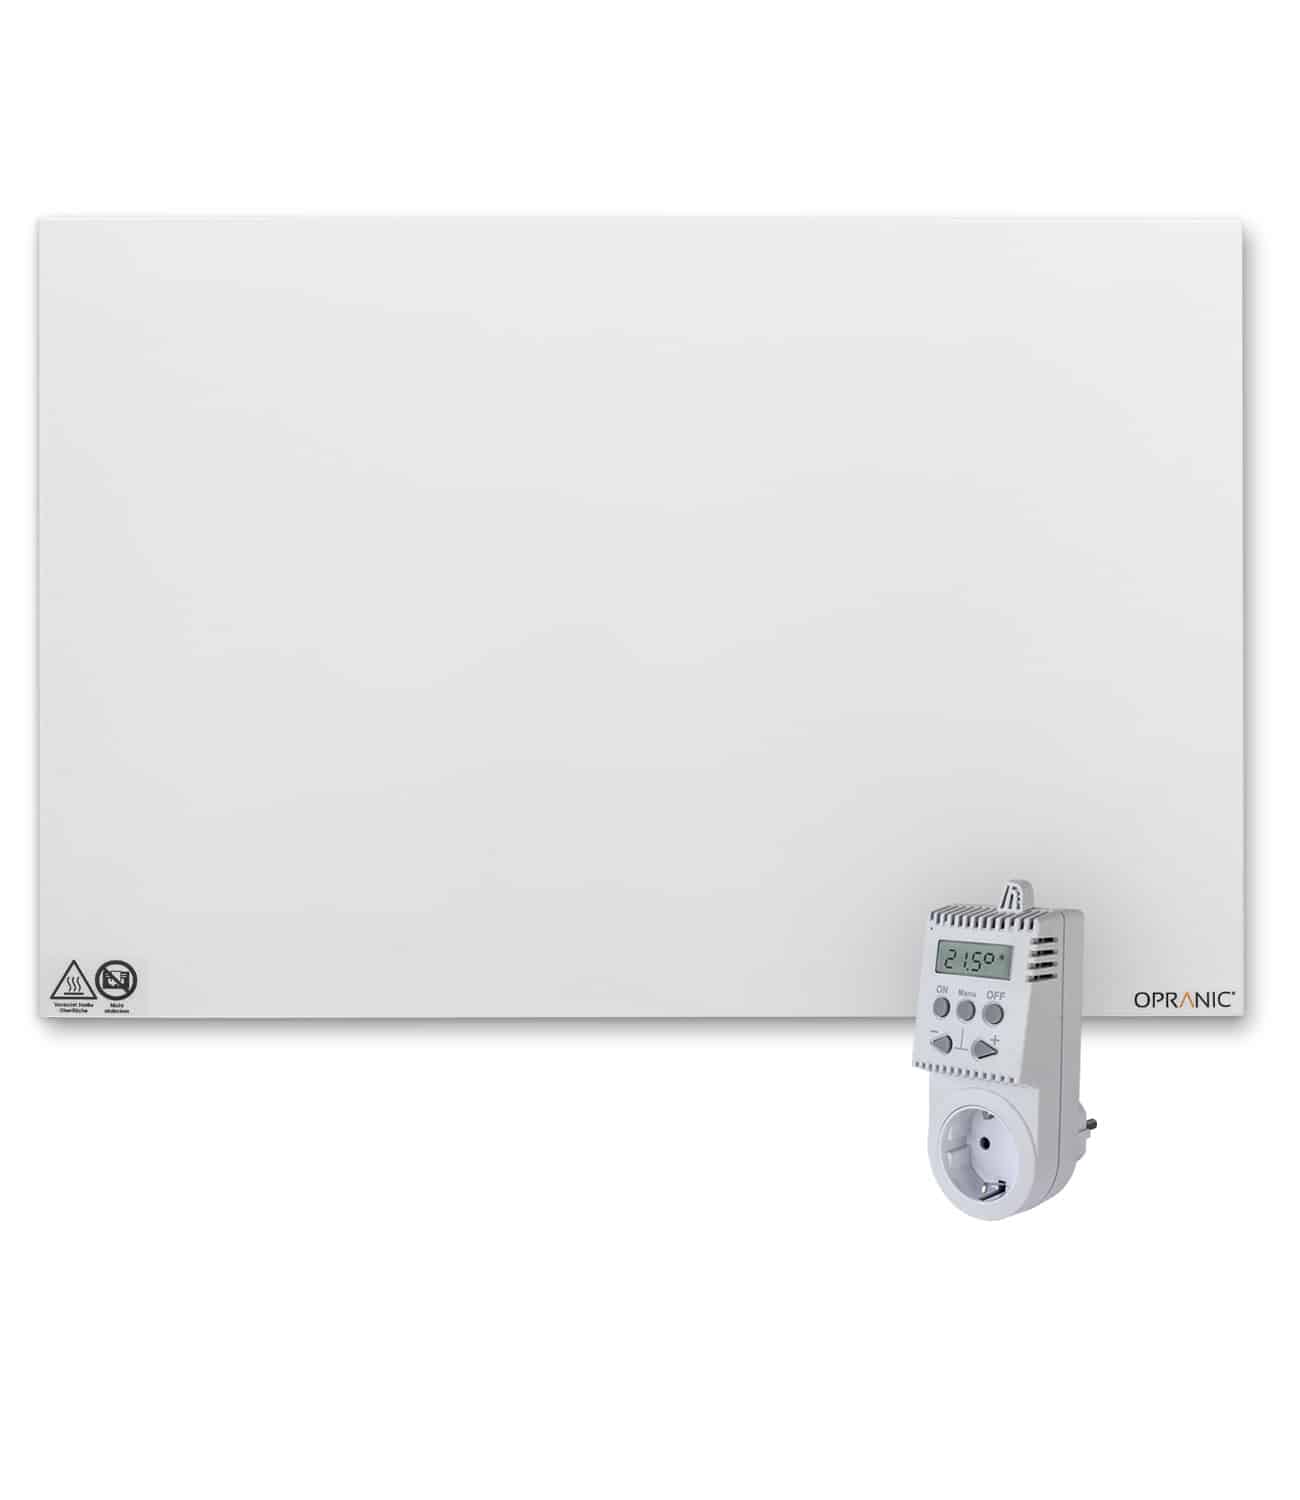 OPRANIC P5, Metal 700W, Infrared Panel Heater and OT50 Thermostat